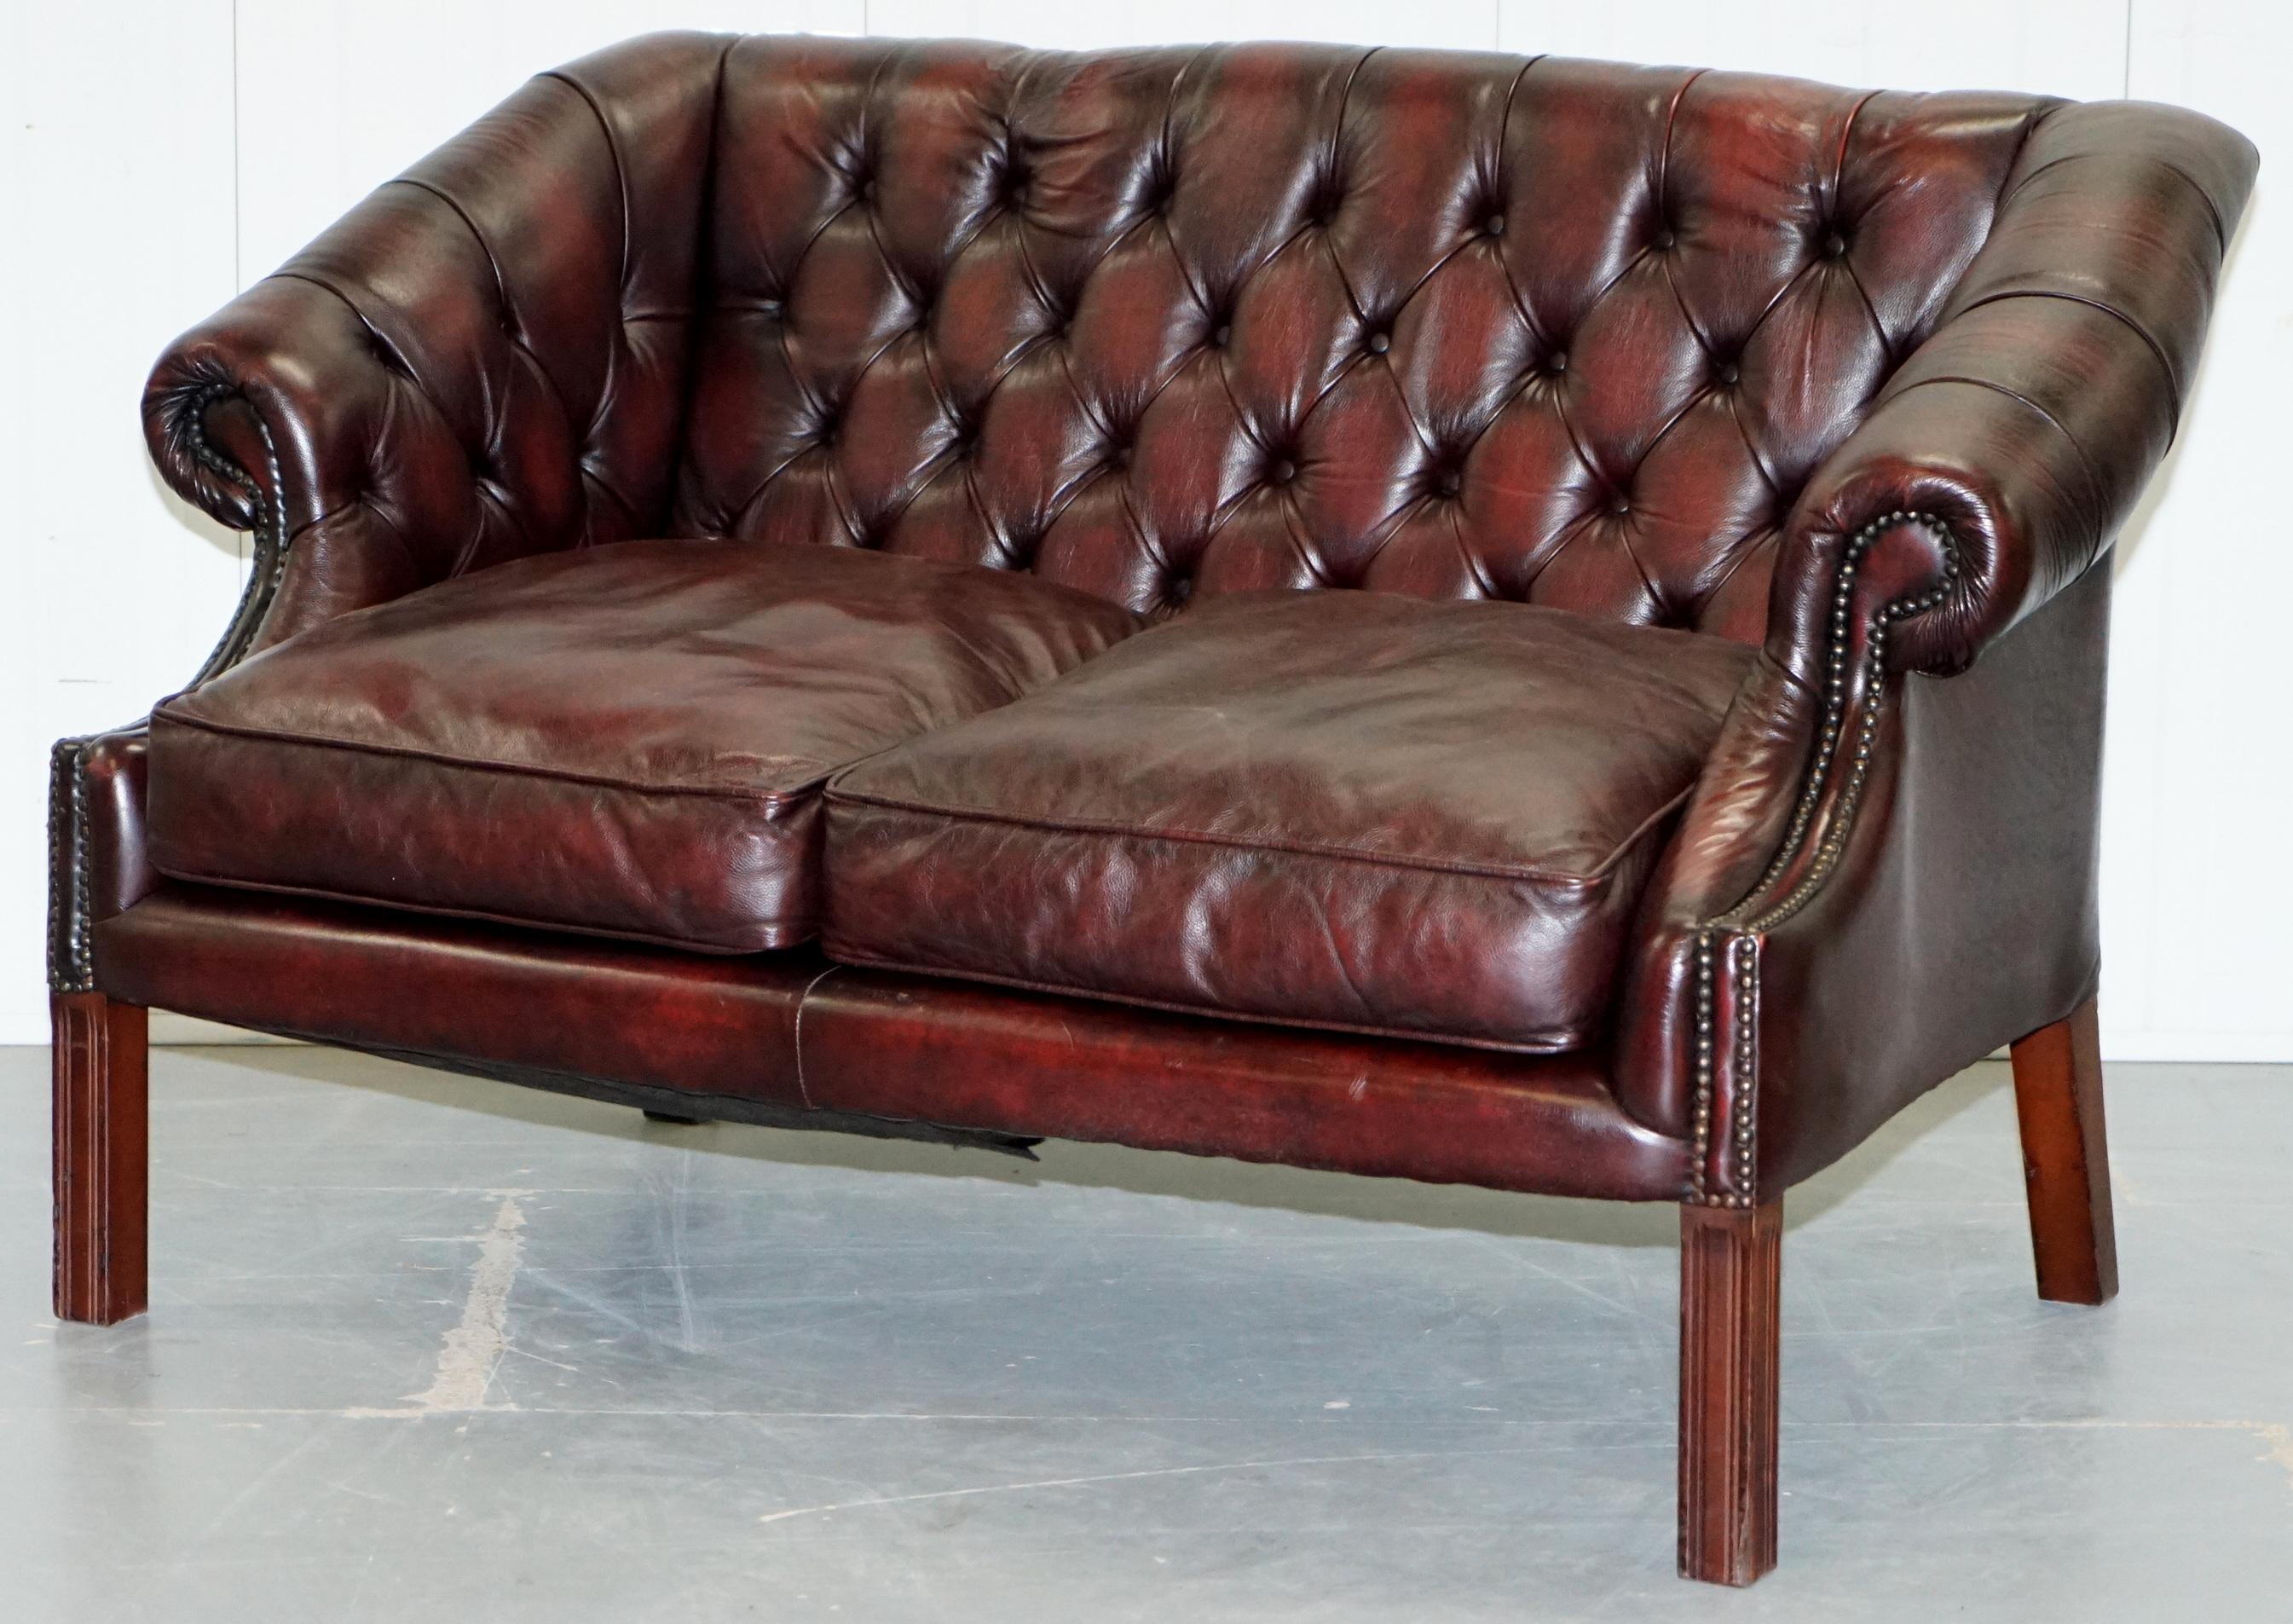 Victorian Chesterfield Lutyen's Style Viceroy's Oxblood Leather Two-Seat Sofa